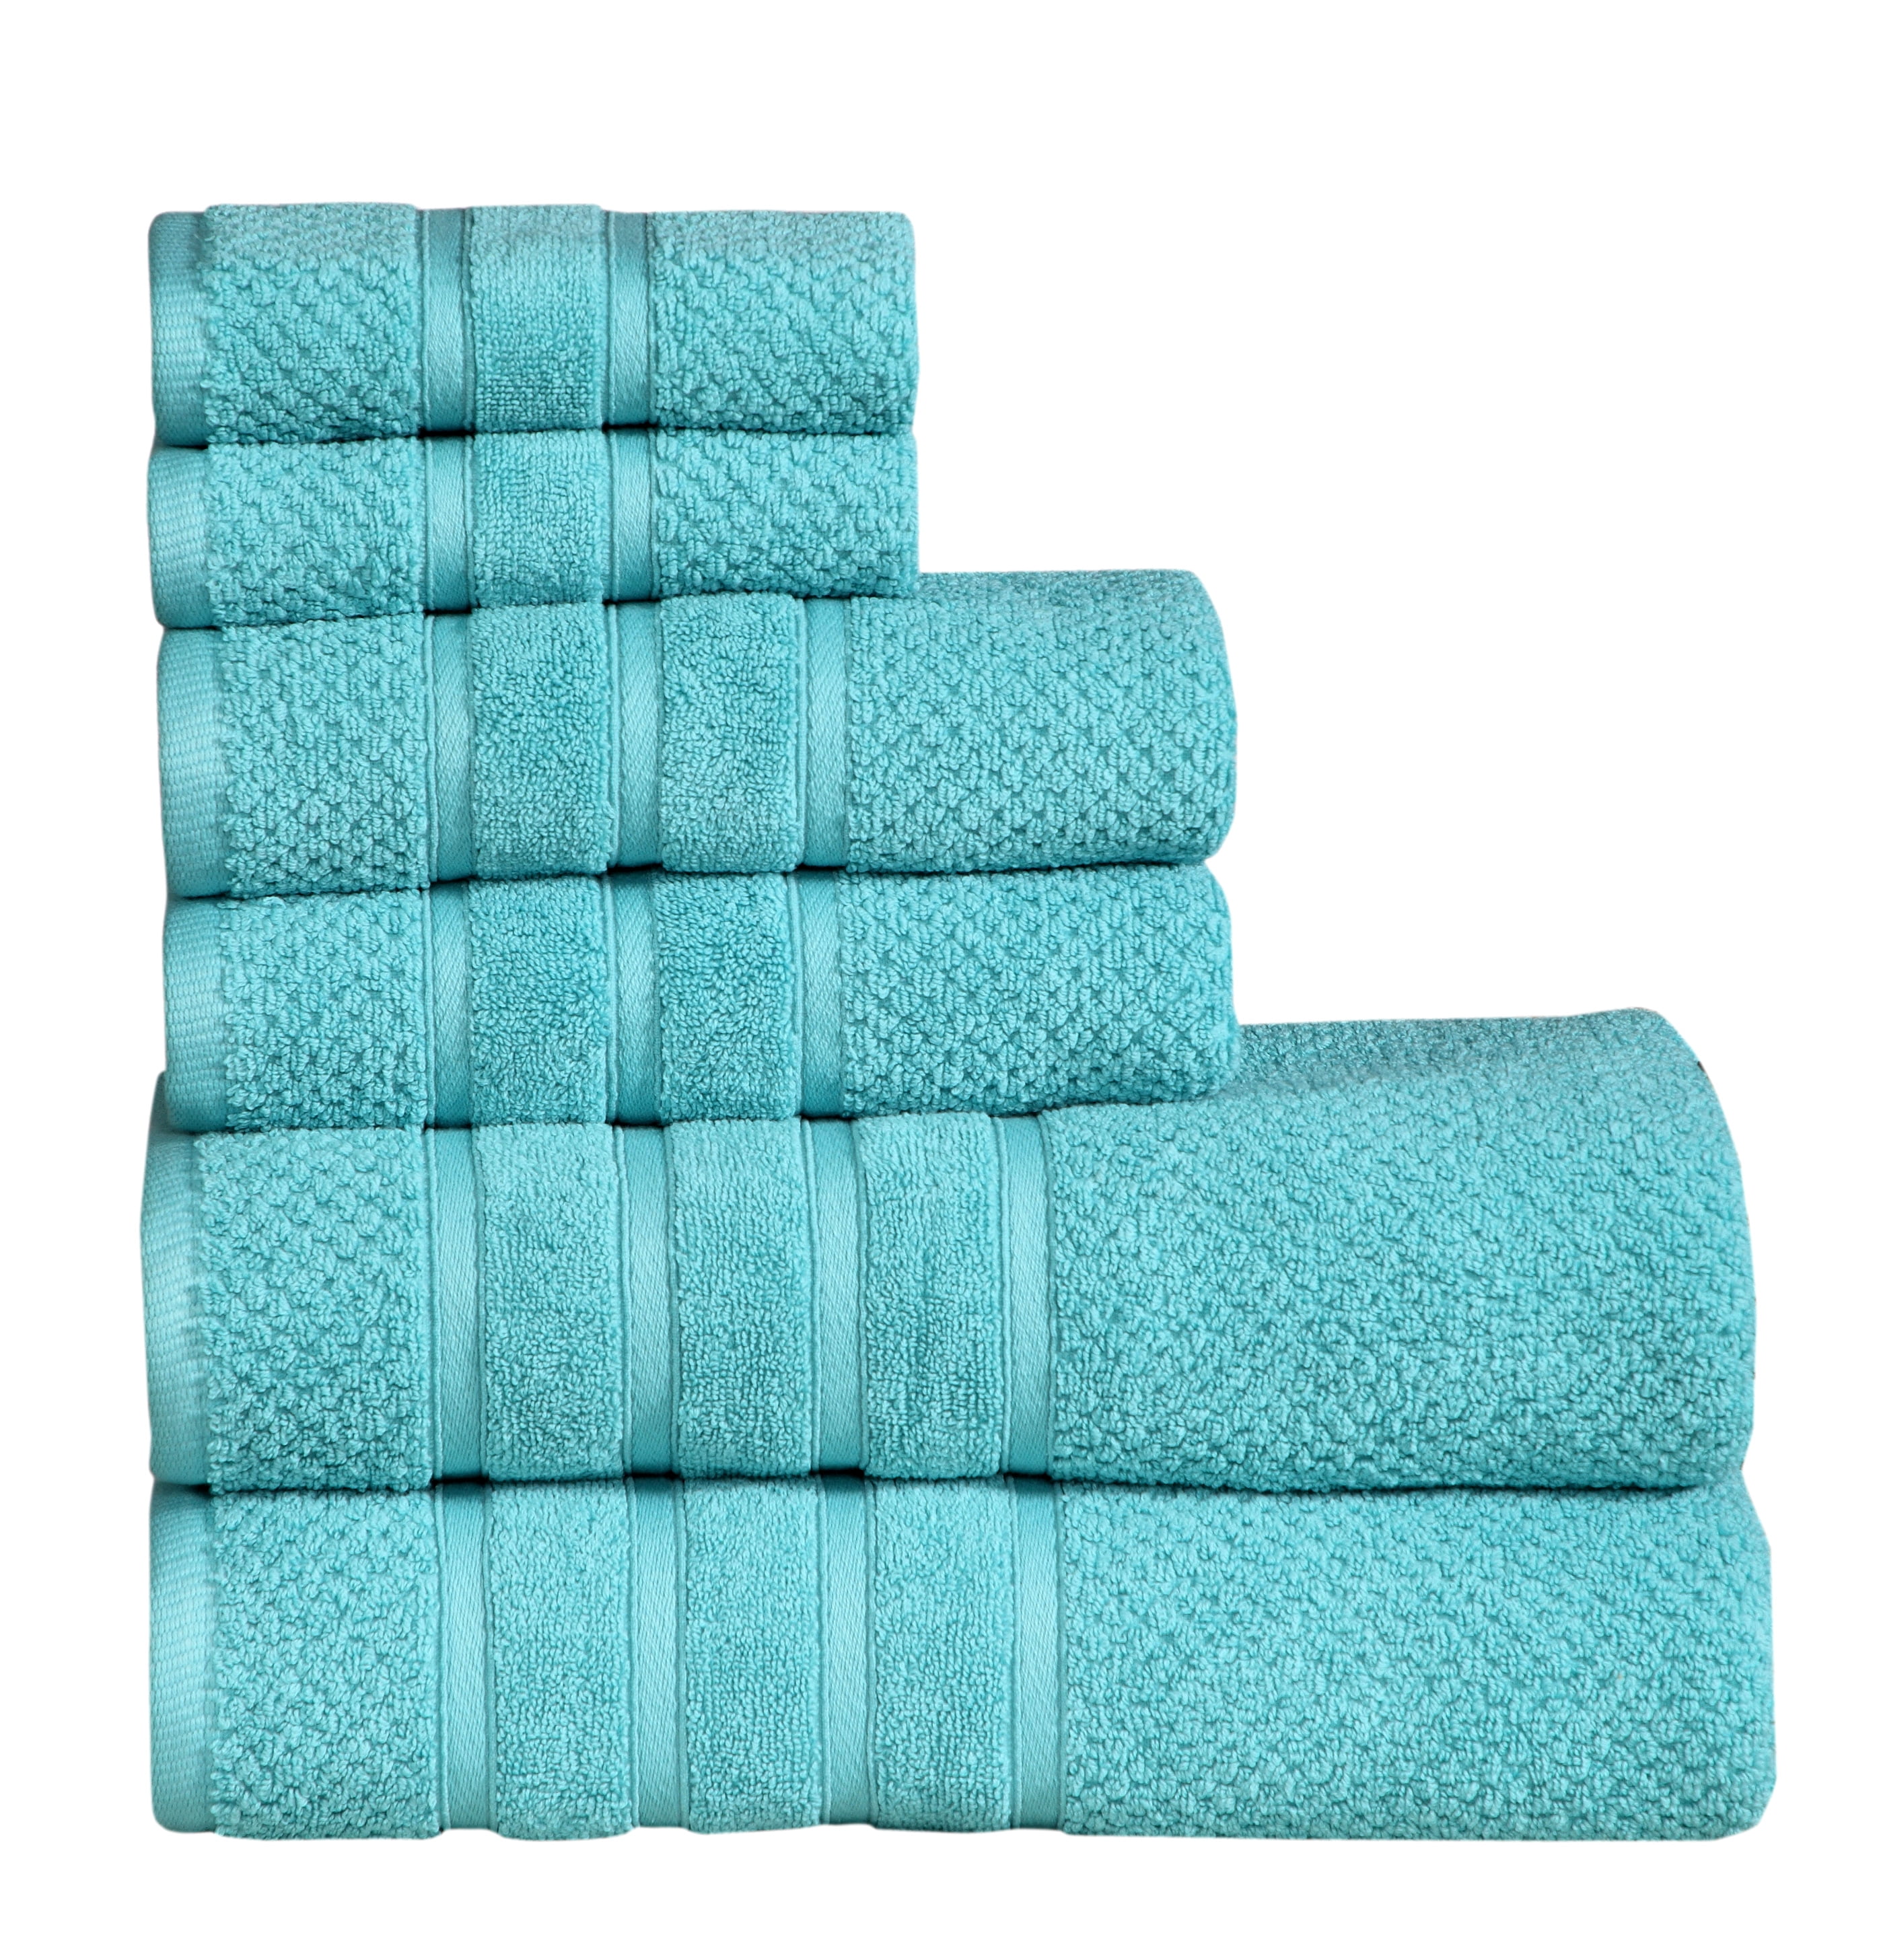 Feather & Stitch 6 Piece Sets of Bathroom Towels - 100% Cotton High Quality  - Fade Resistant Hotel Collection Bath Towel Set - 2 Bath Towels, 2 Hand  Towels & 2 Washcloth - Aqua 